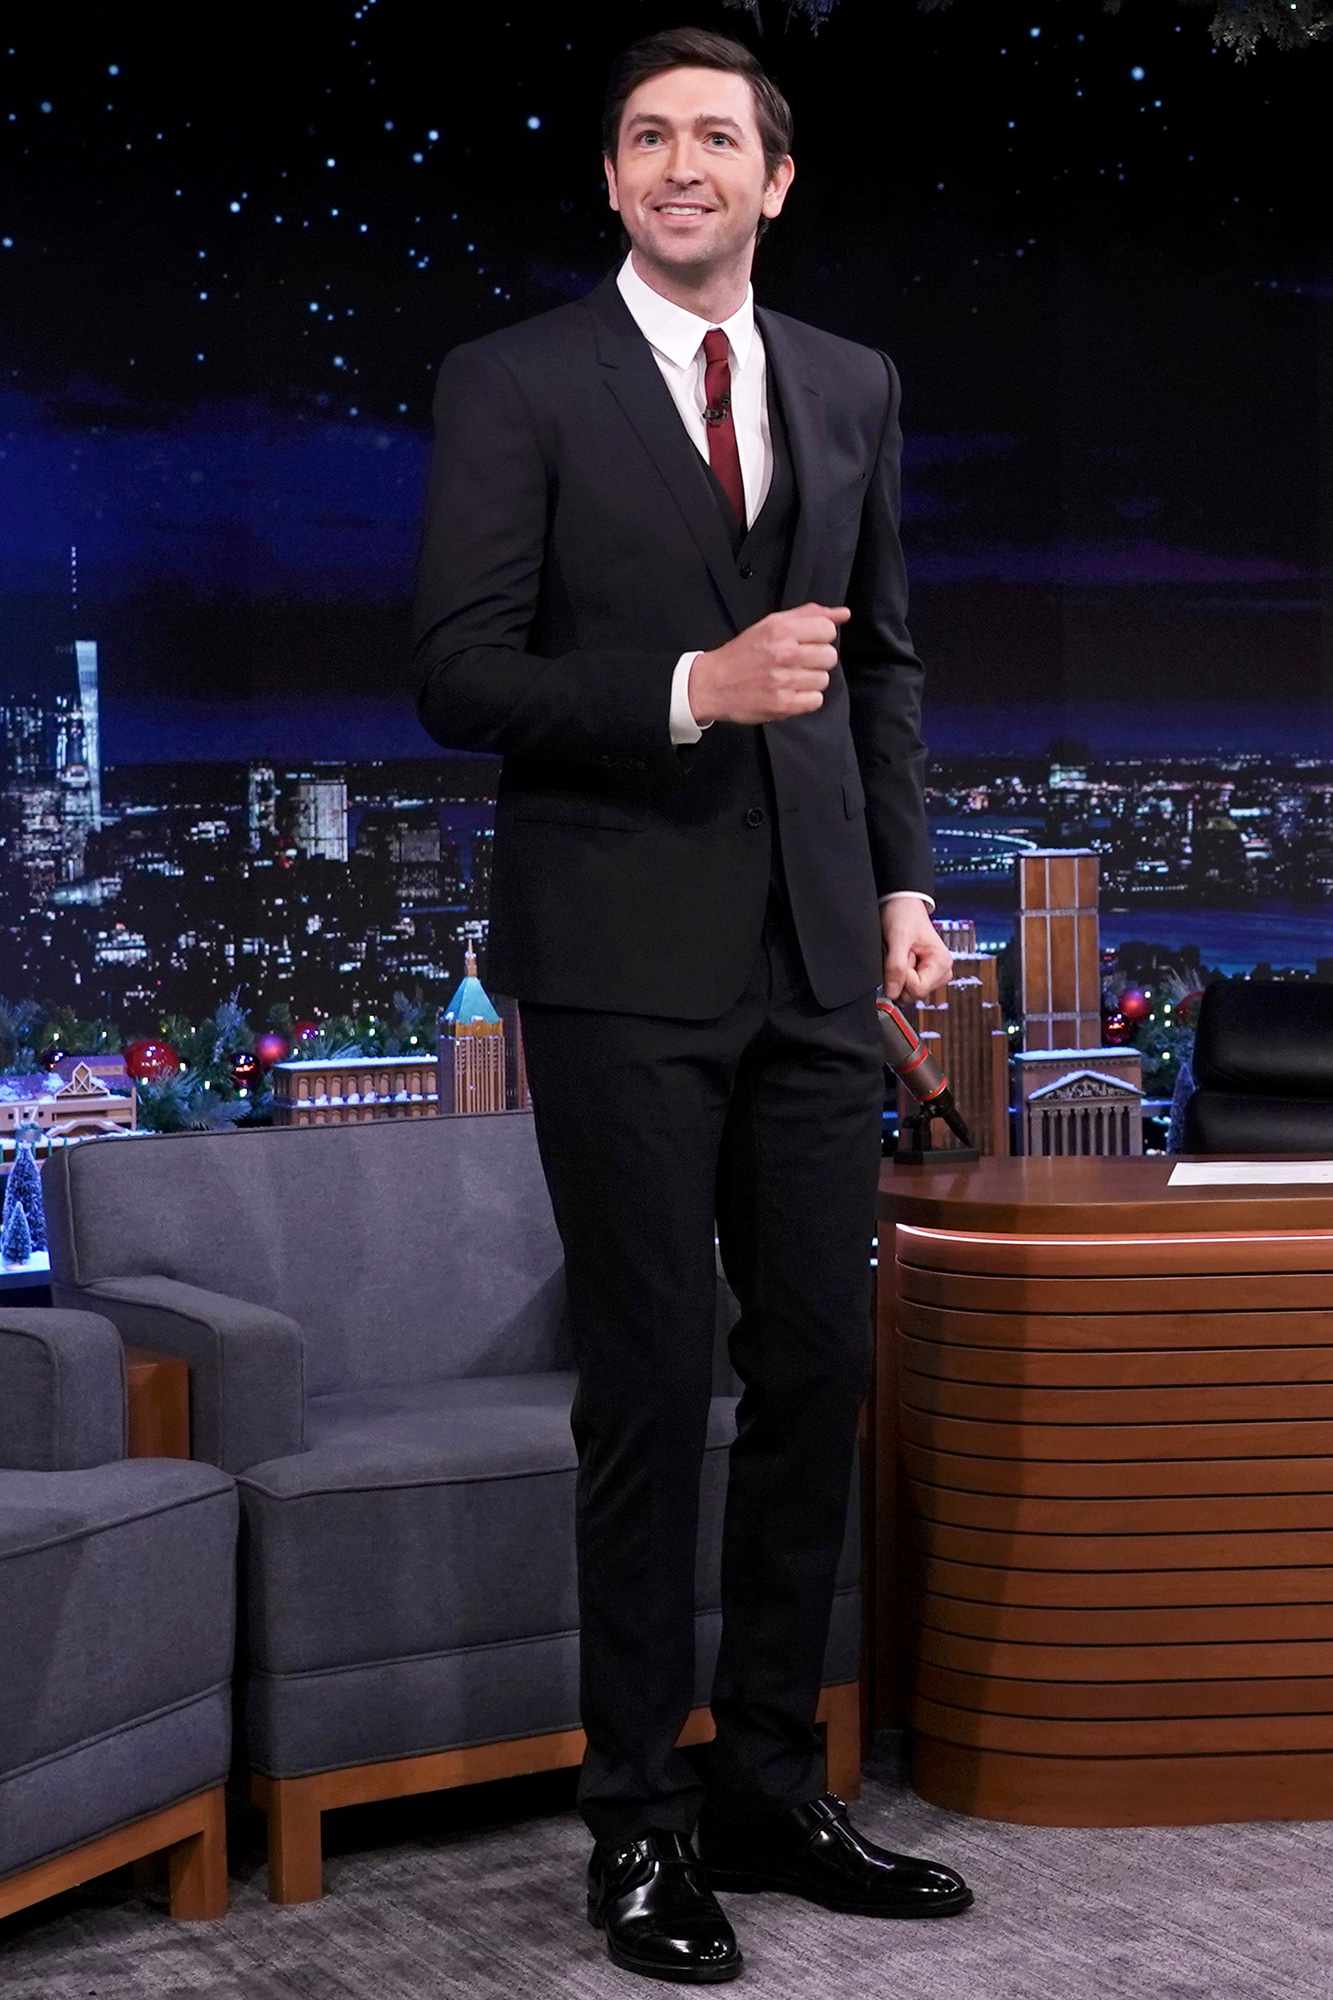 THE TONIGHT SHOW STARRING JIMMY FALLON -- Episode 1561 -- Pictured: Actor Nicholas Braun arrives on Tuesday, November 30, 2021 -- (Photo by: Sean Gallagher/NBC/NBCU Photo Bank via Getty Images)